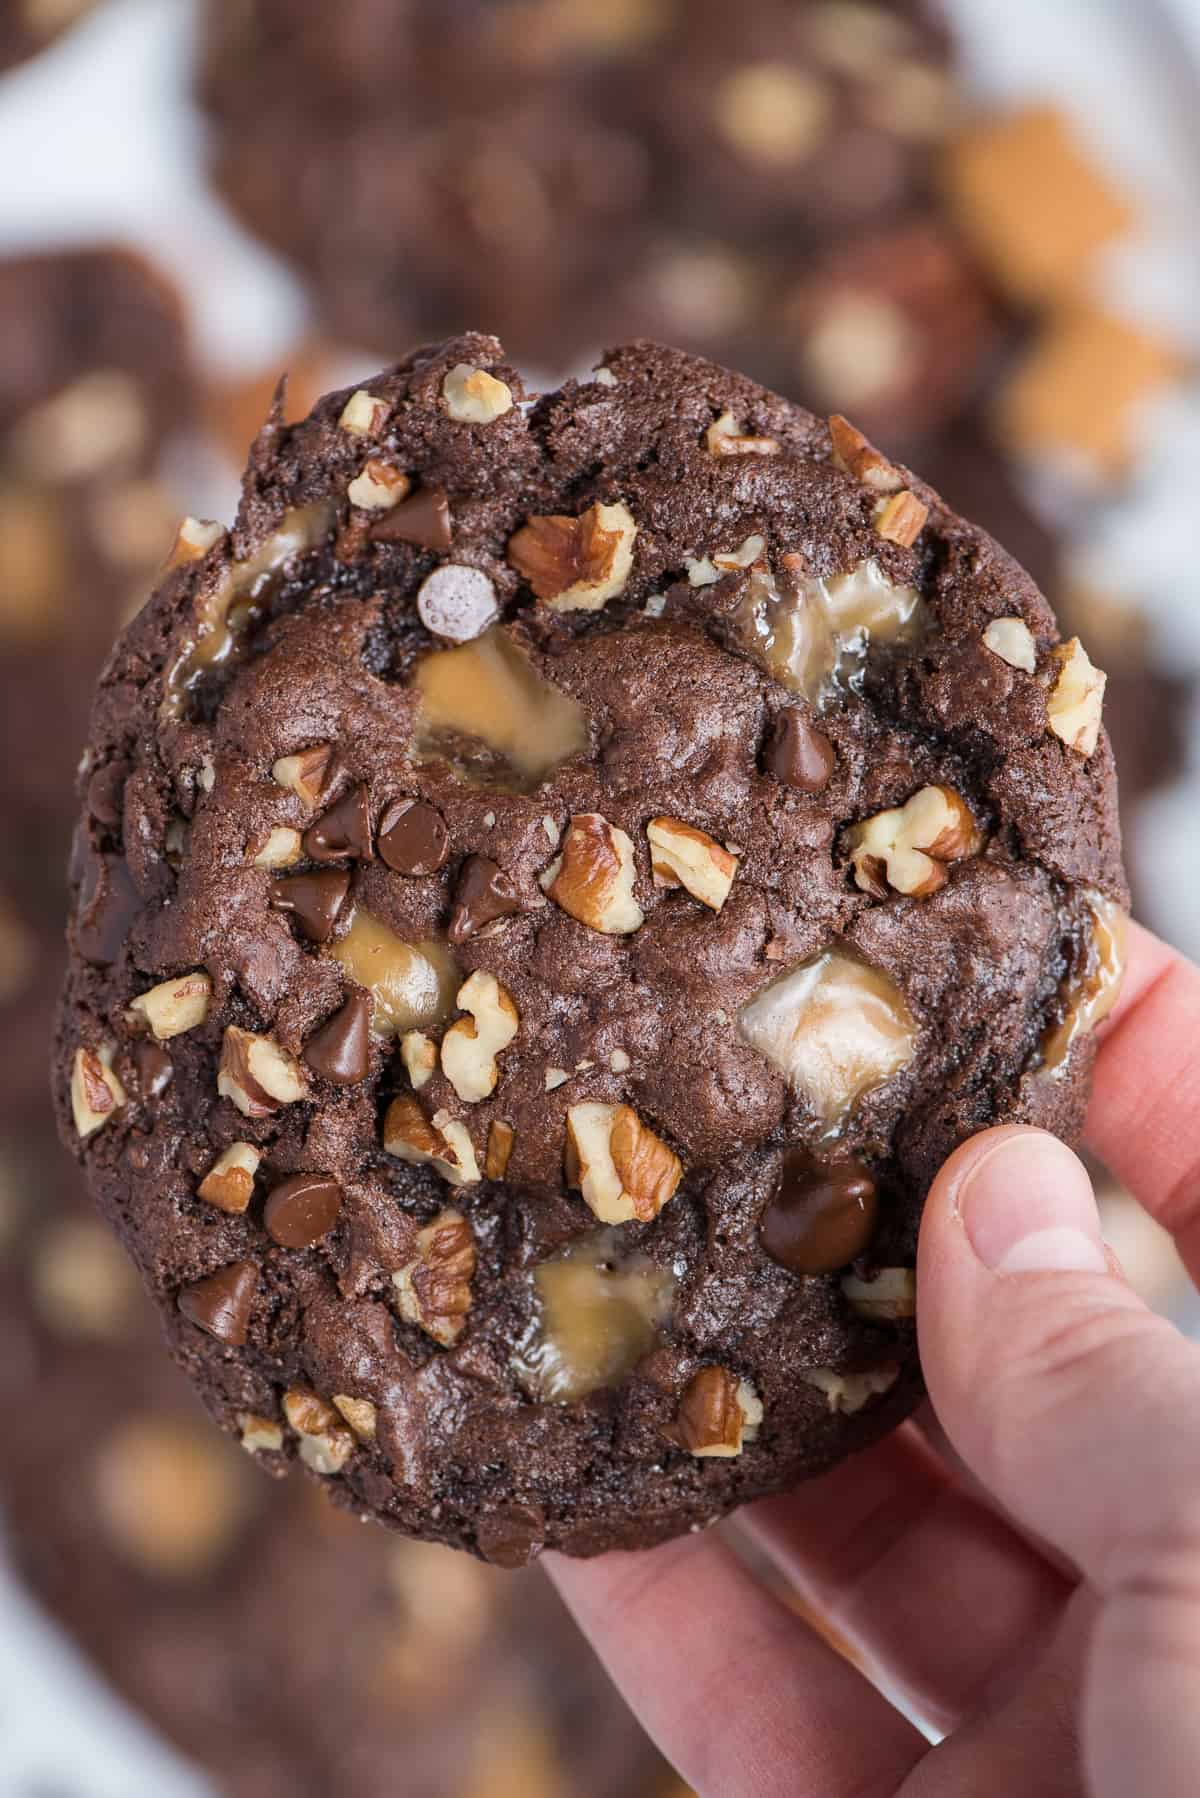 hand holding chocolate turtle cookie with caramel, pecans and chocolate chips